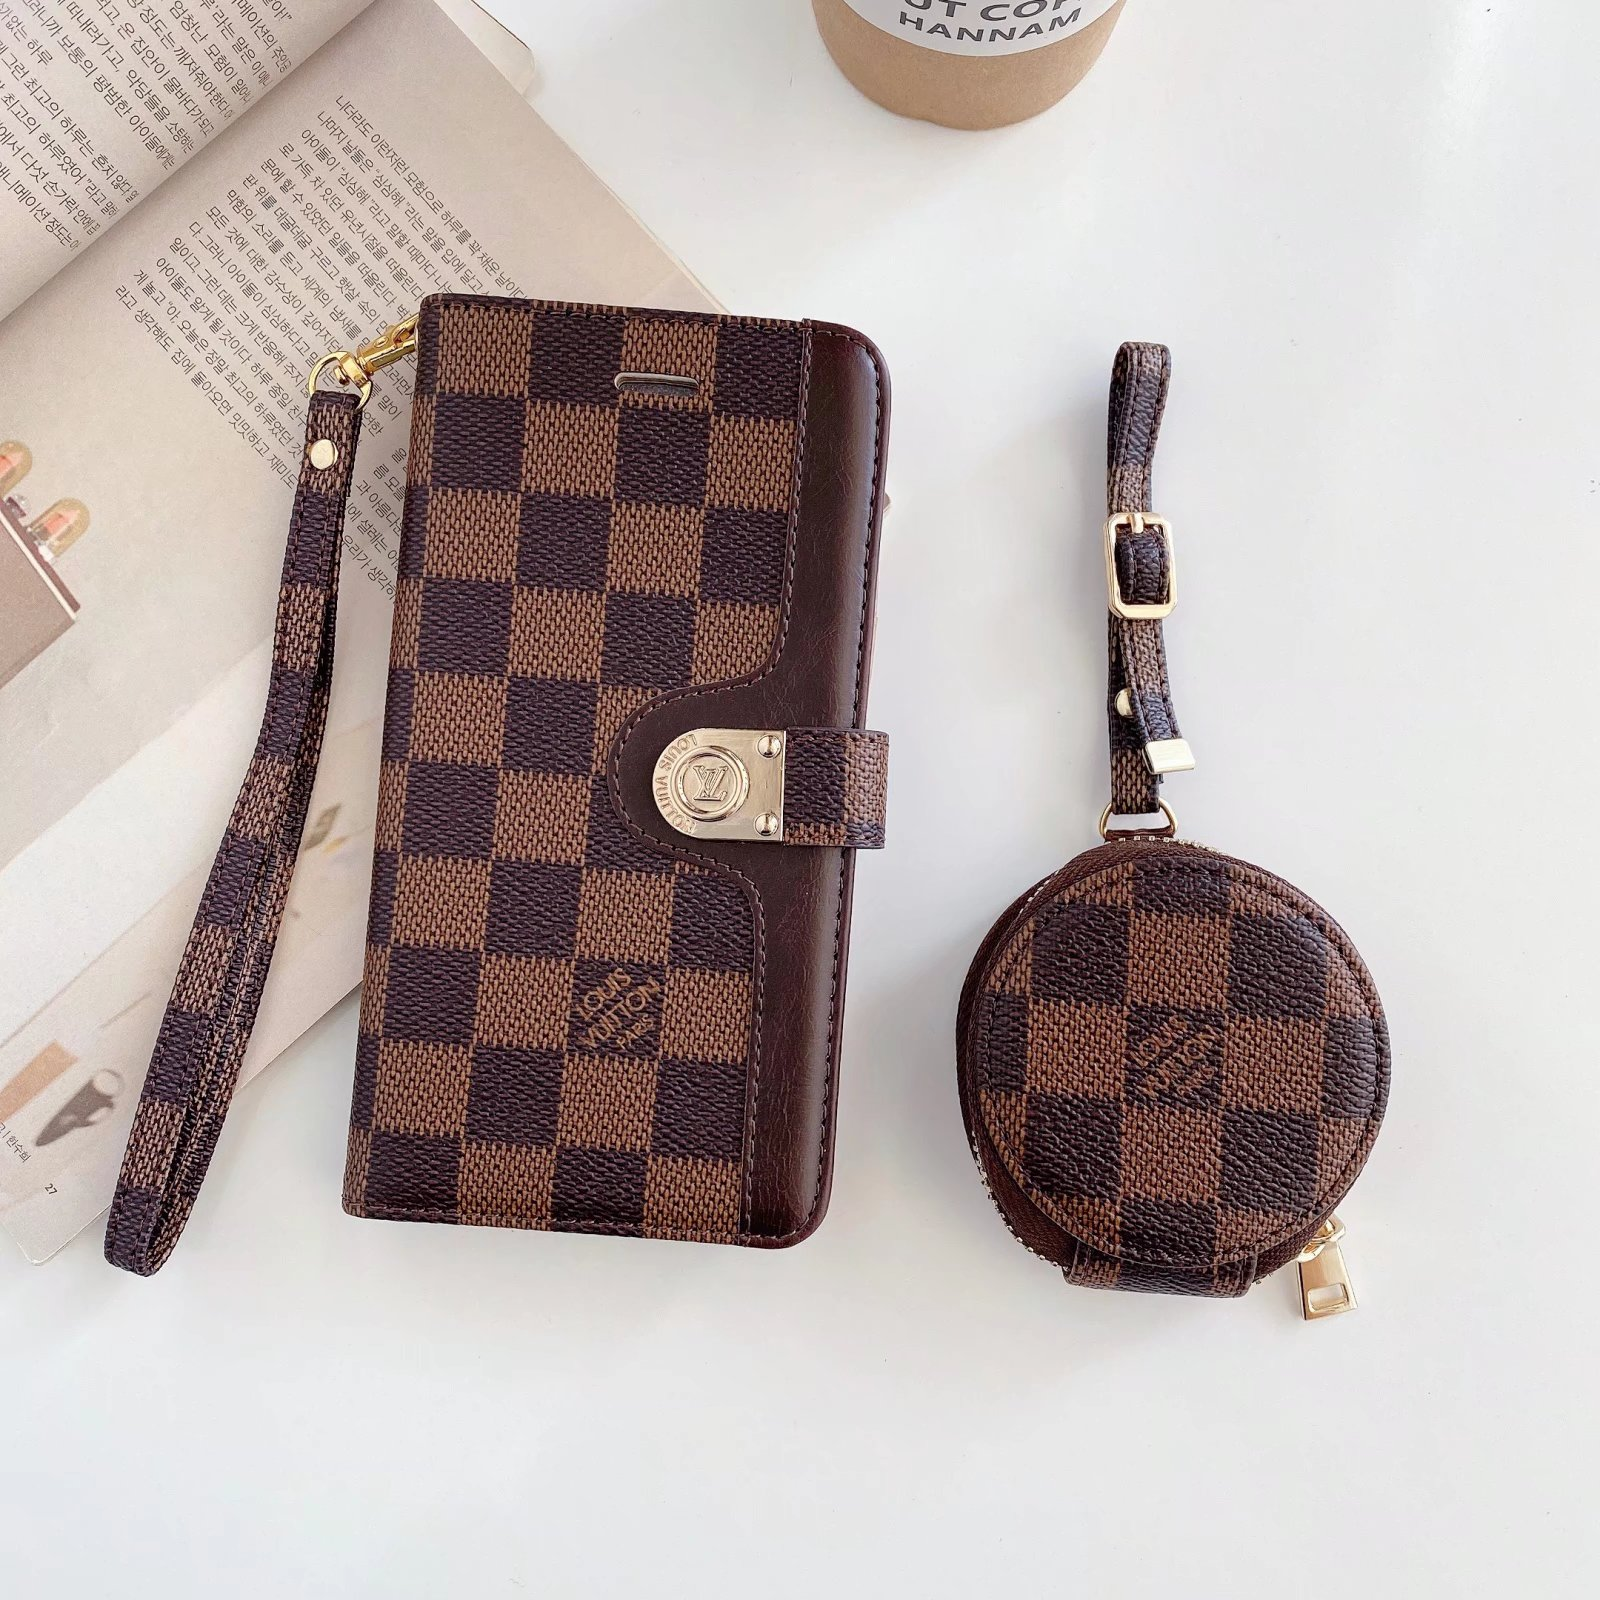 😍😎Super textured mobile phone case and earphone case two-piece set